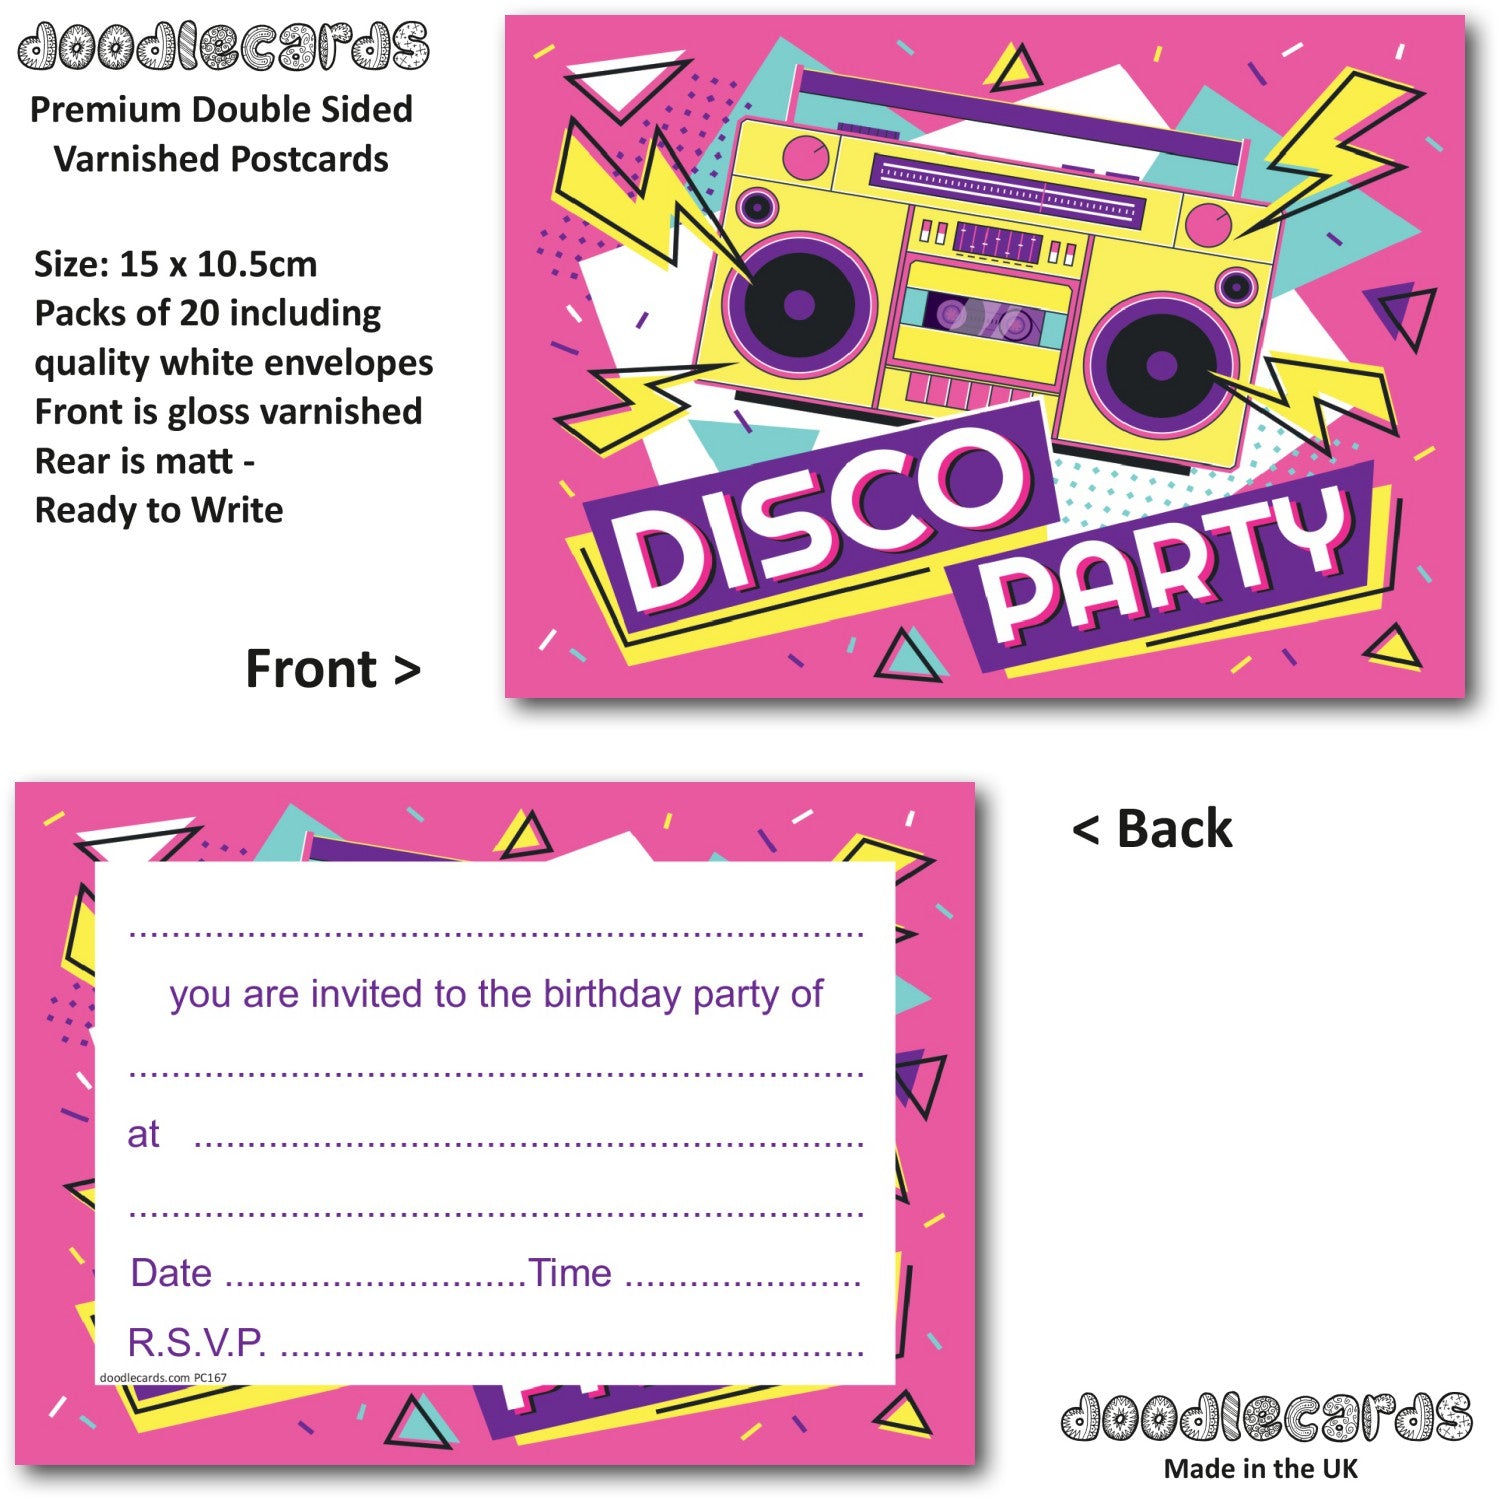 Birthday Party Invitations Disco 20 Cards and 20 Envelopes – doodlecards